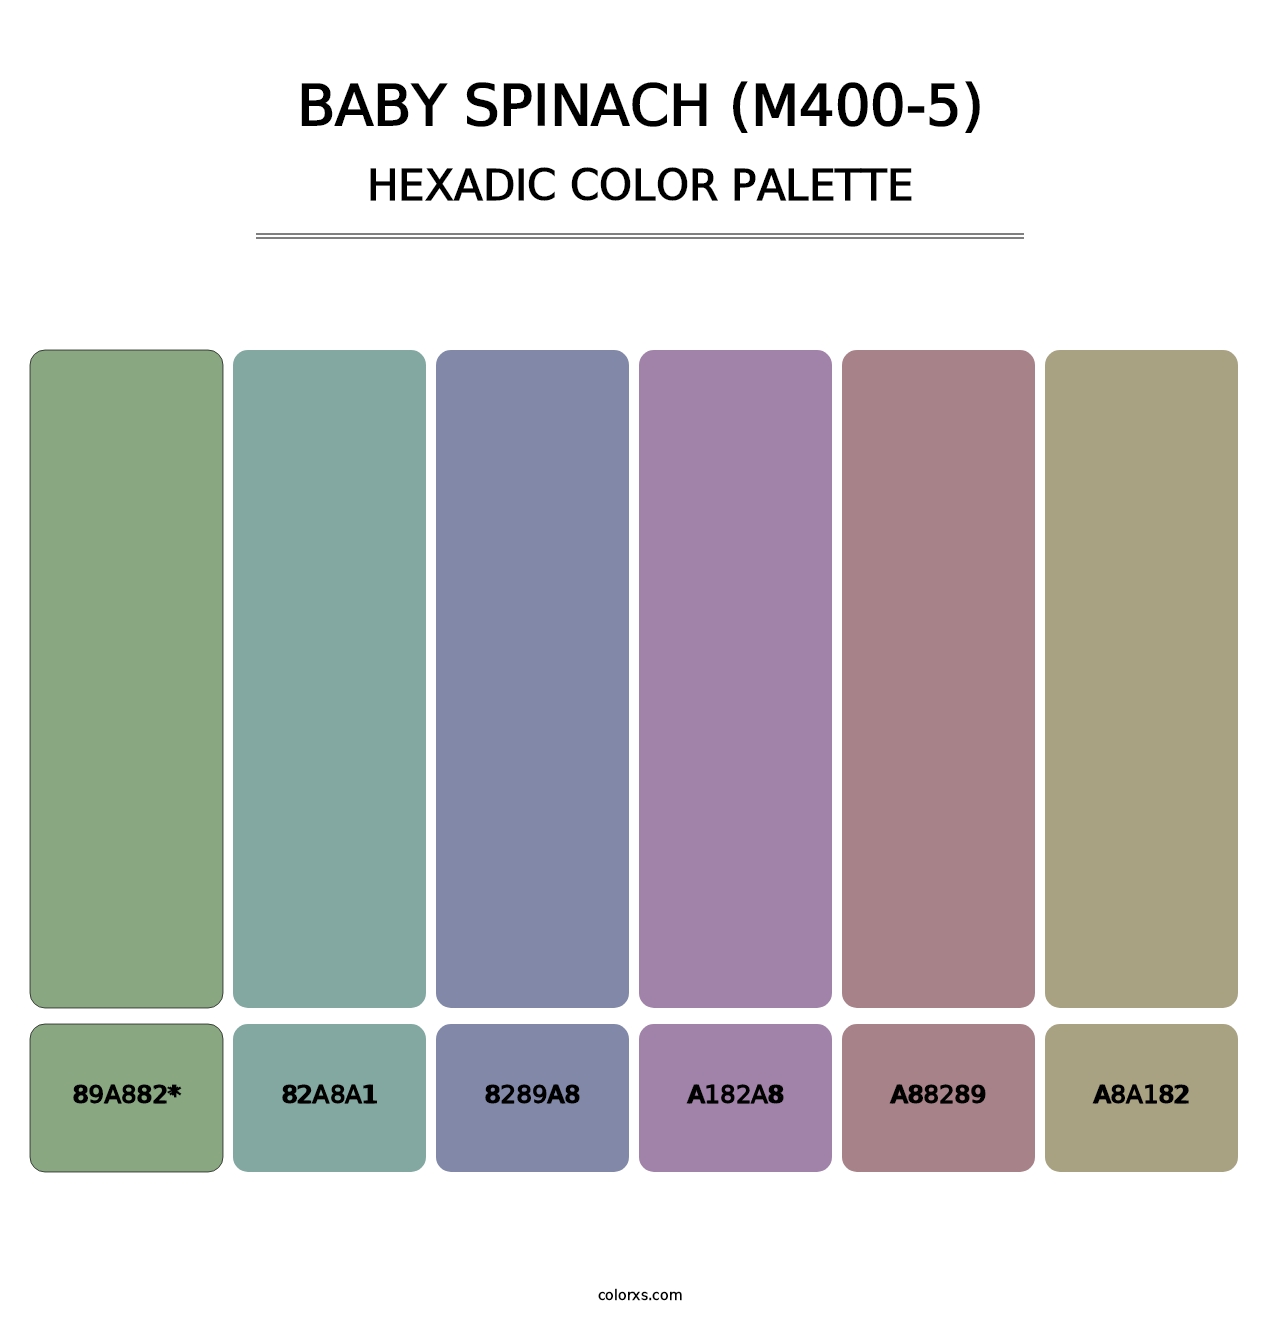 Baby Spinach (M400-5) - Hexadic Color Palette